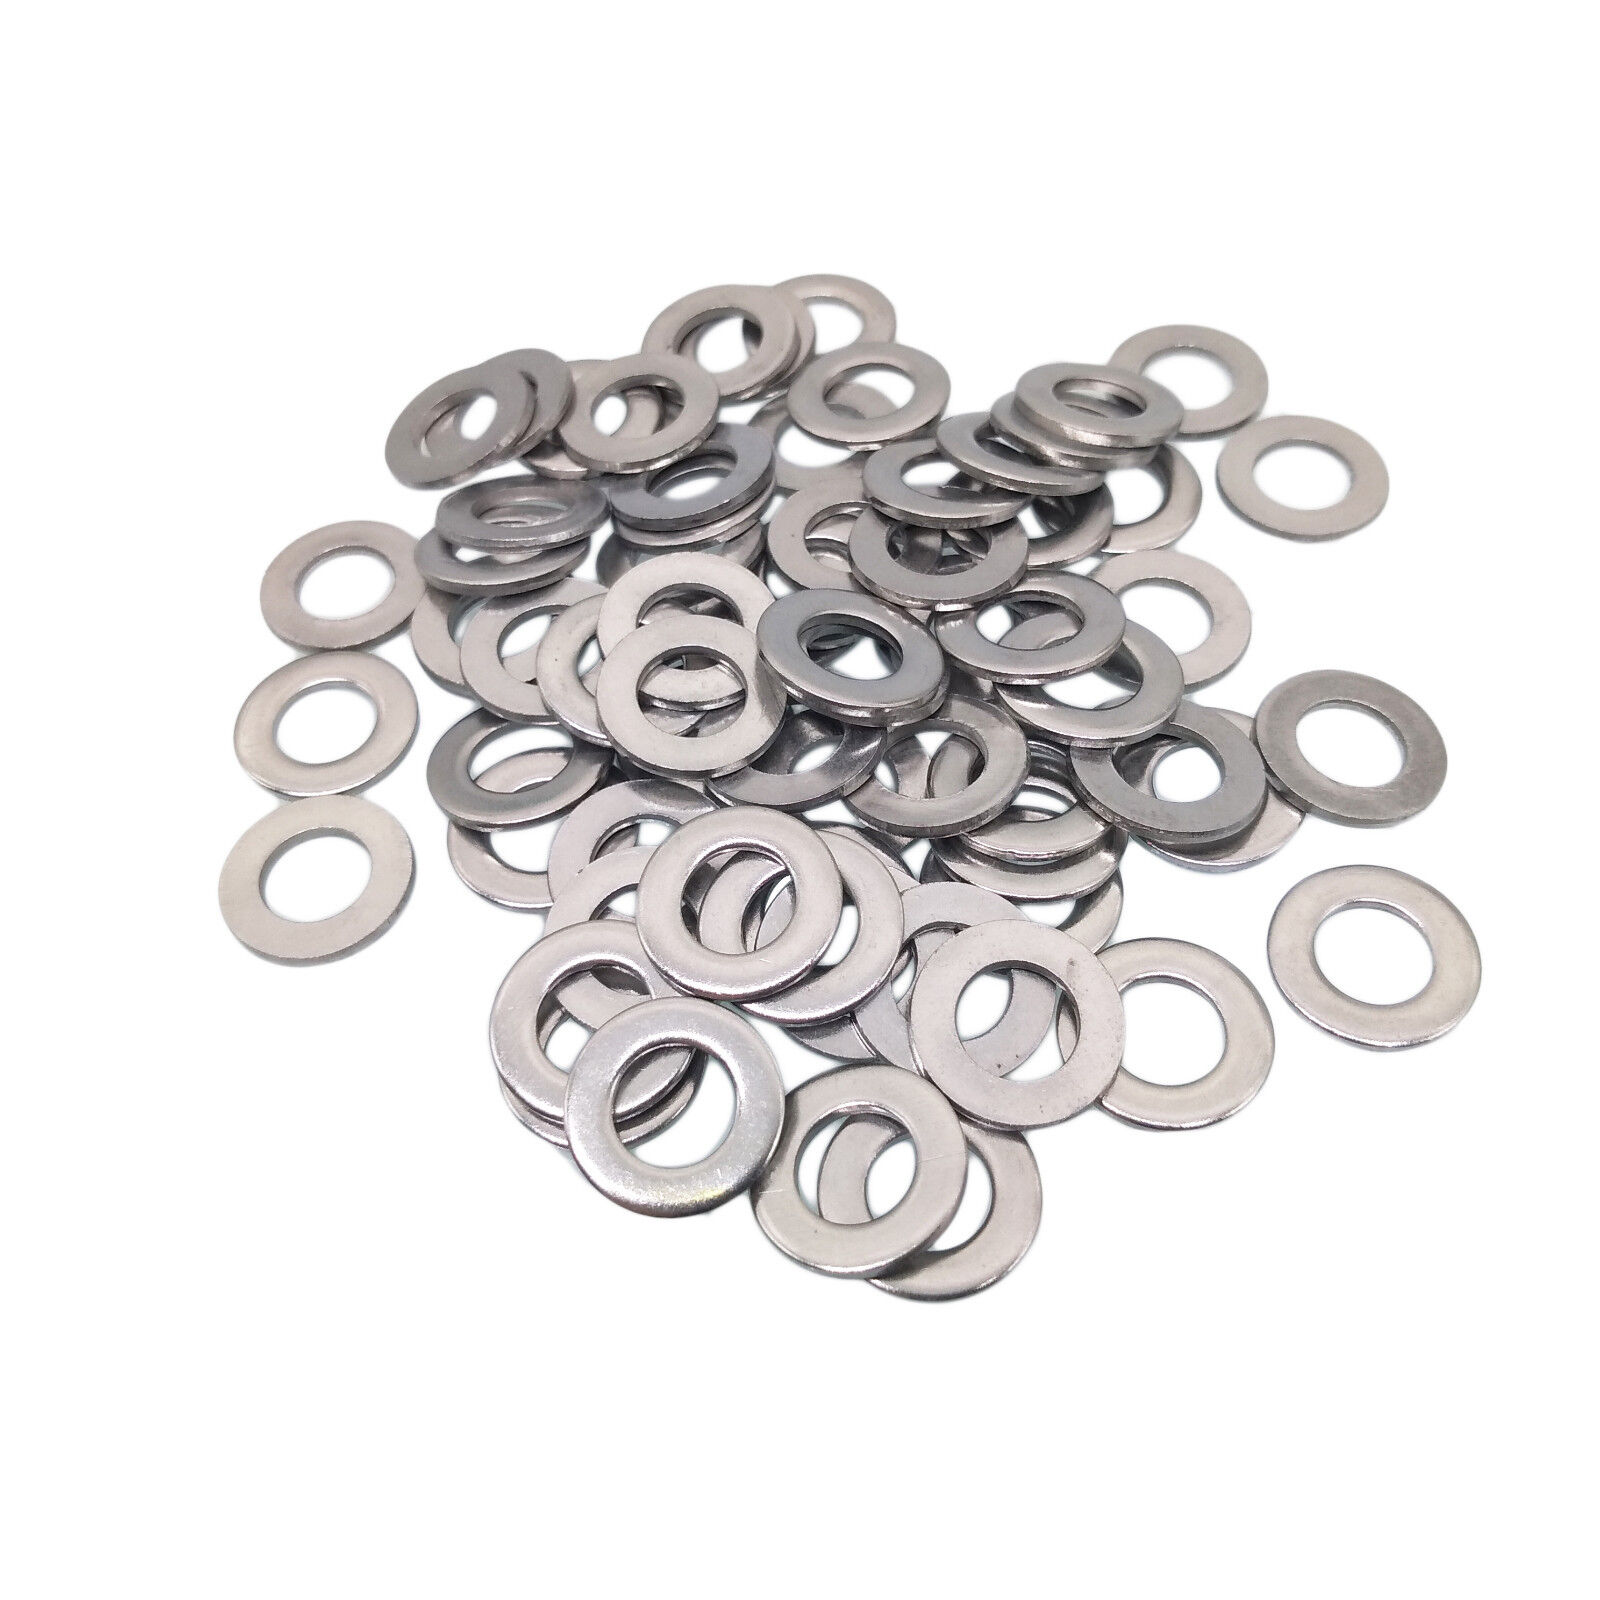 US Stock 100pcs M6 6mm 304 Stainless Steel Metric Flat Washer Washers